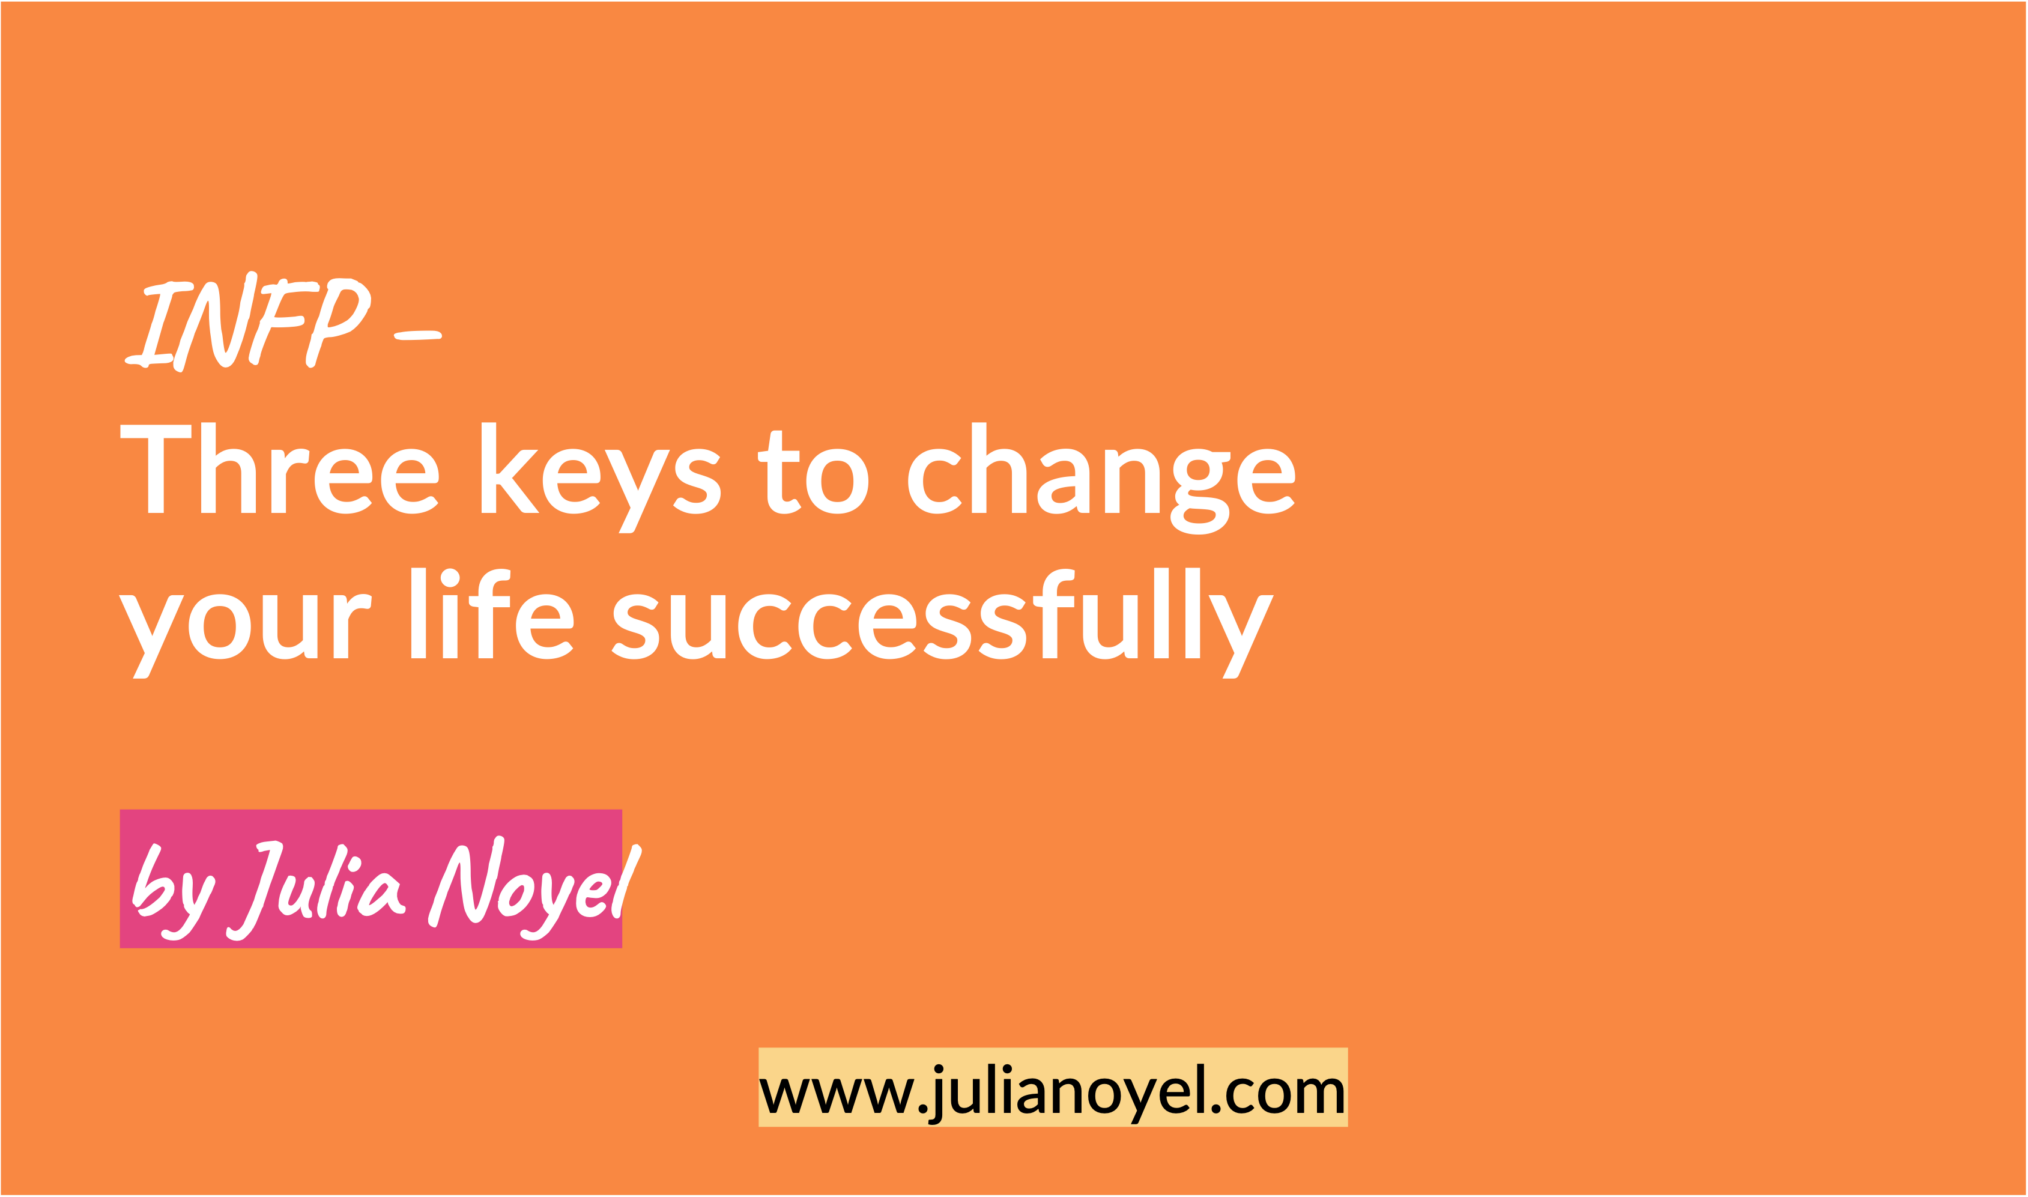 INFP – Three keys to change your life successfully by Julia Noyel